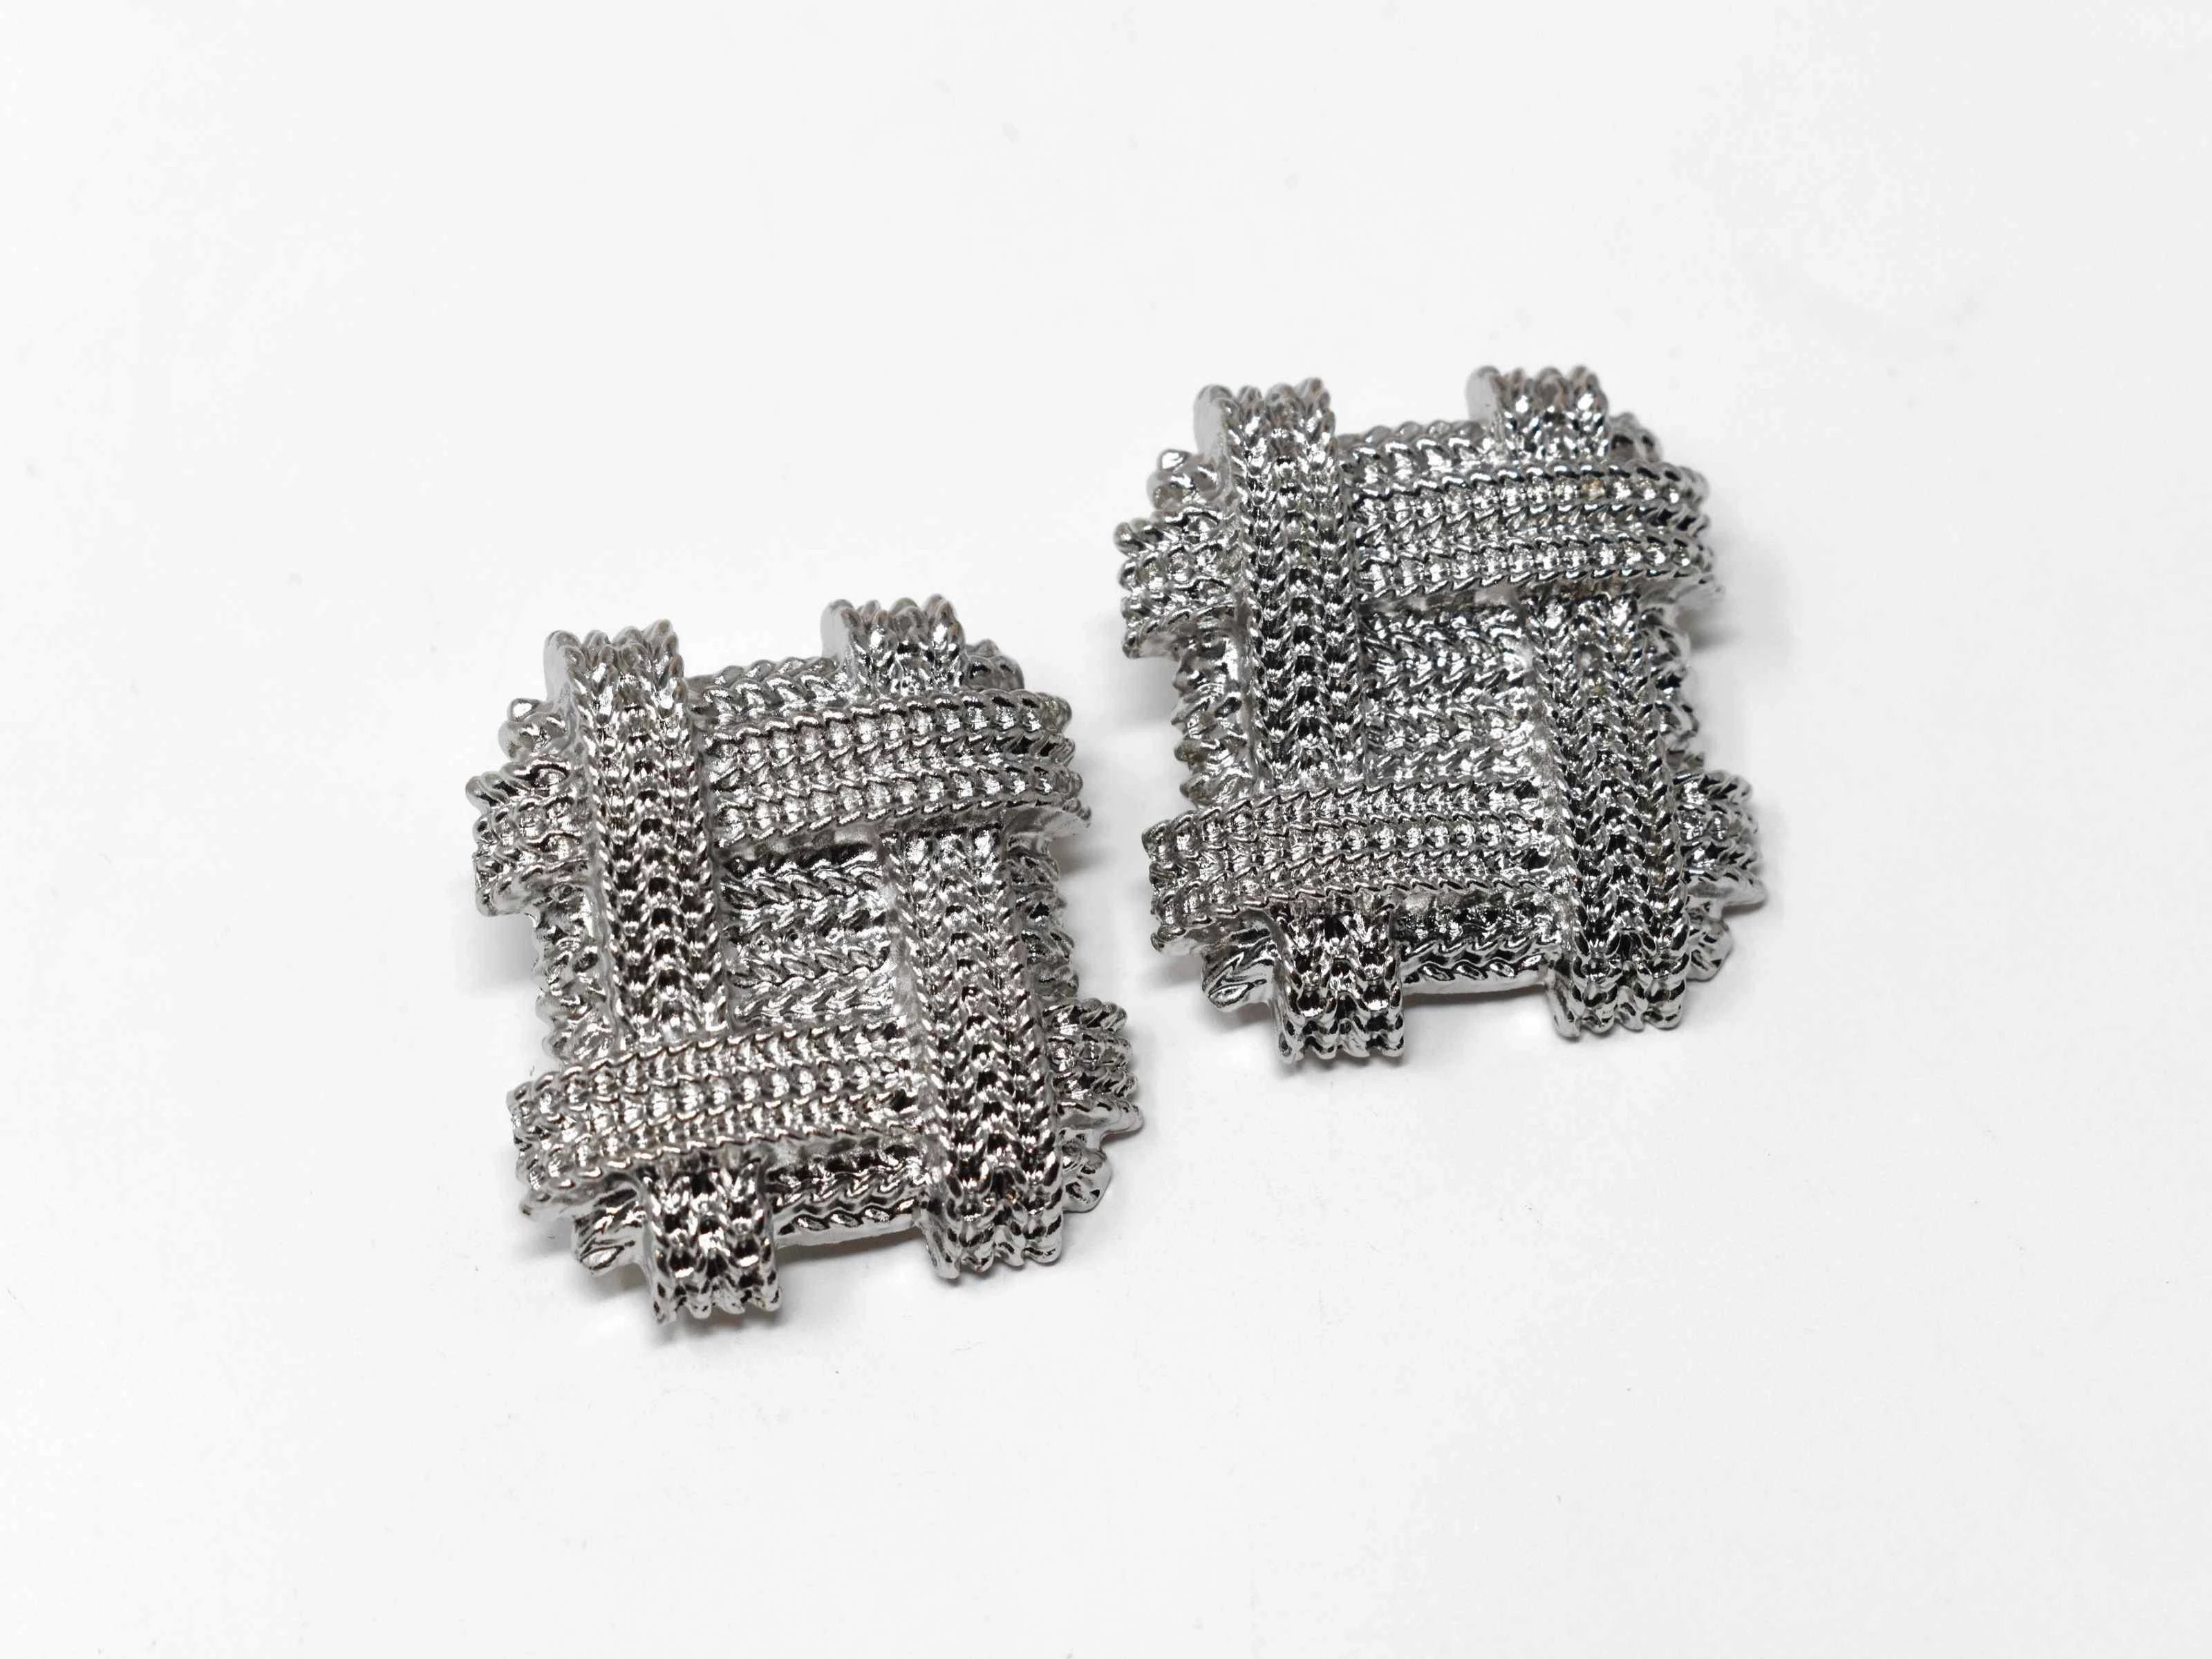 Our Ane silver earrings Chic design will showcase your standout style with its unique chain design. These oversized square knobs 1 1/2" in length with a clip back clasp. All hail the clip ons!